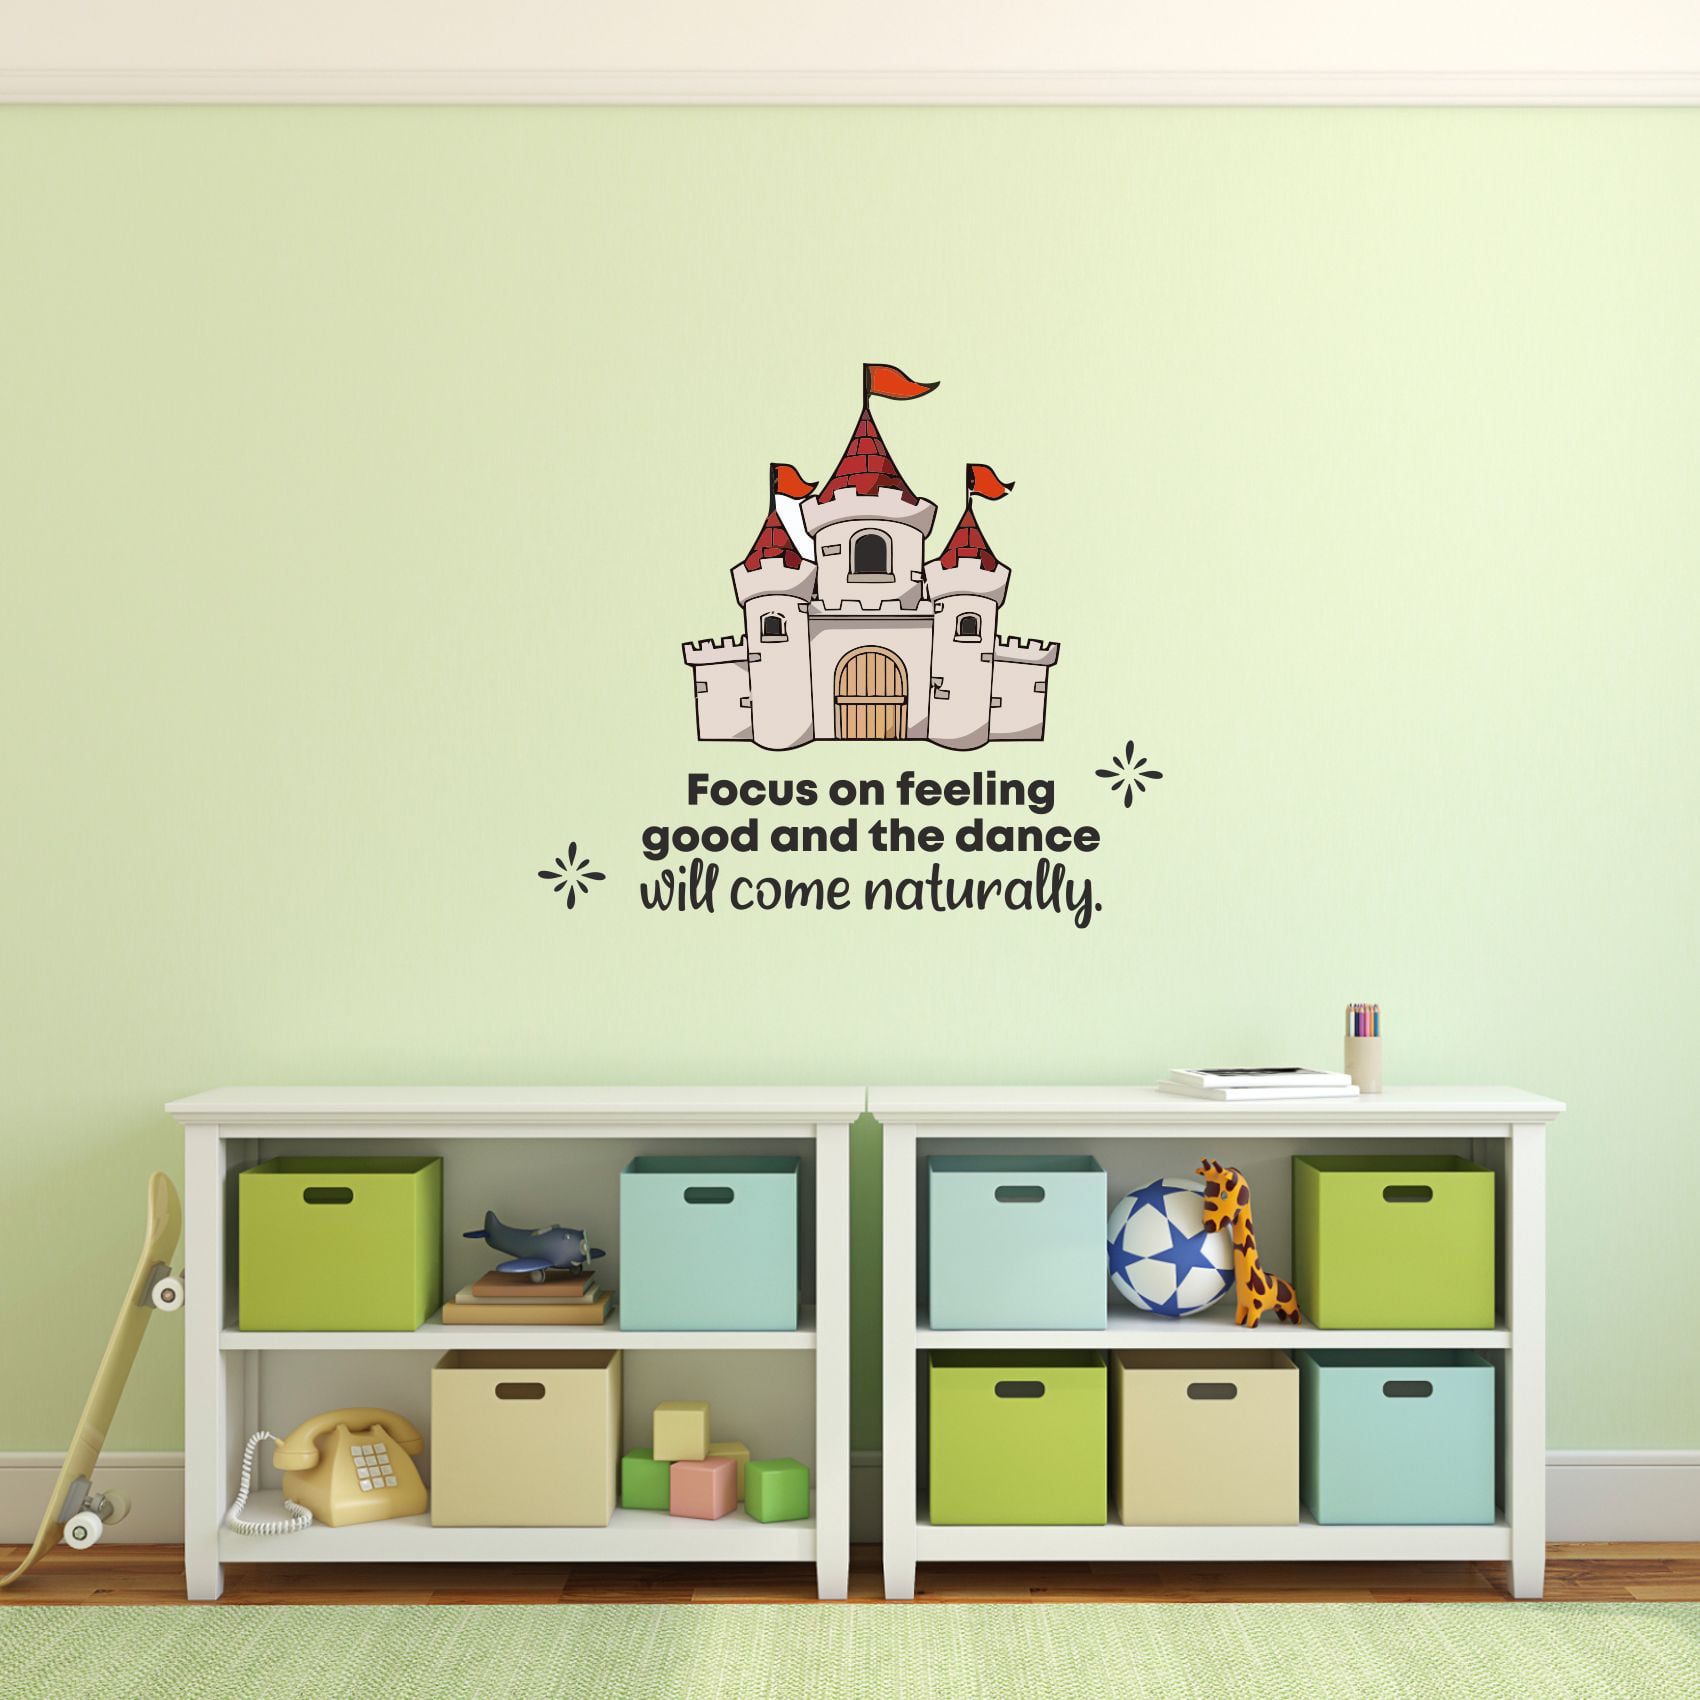 Paper Love Family Home Quote Decoration Decal Mural Wall Stickers 100cm x 35cm